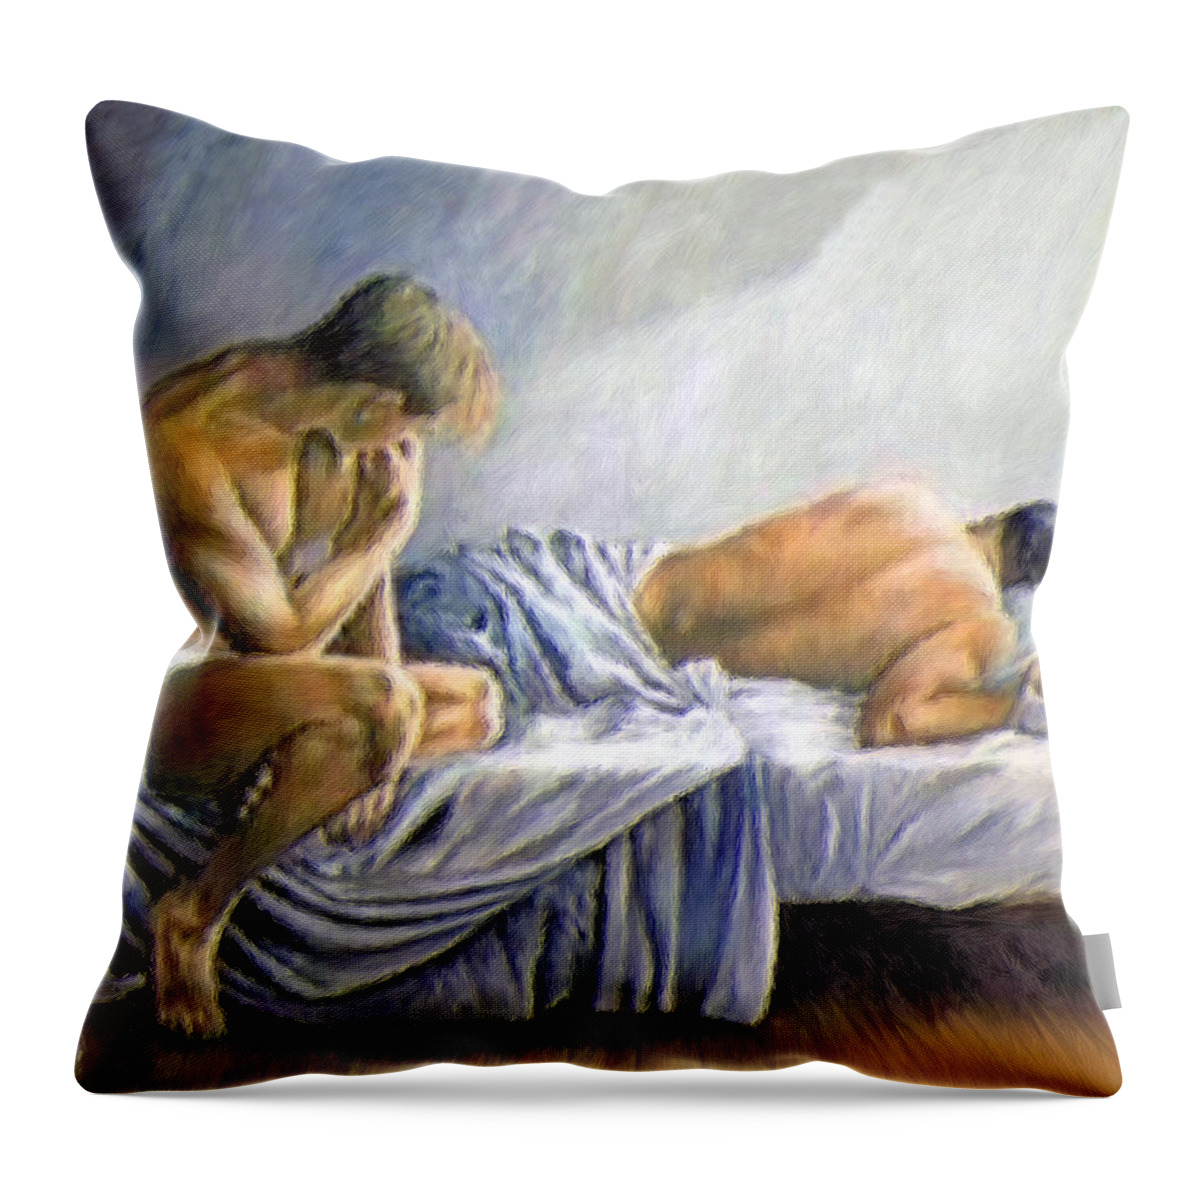 Dreaming Throw Pillow featuring the painting What is He Dreaming by Troy Caperton